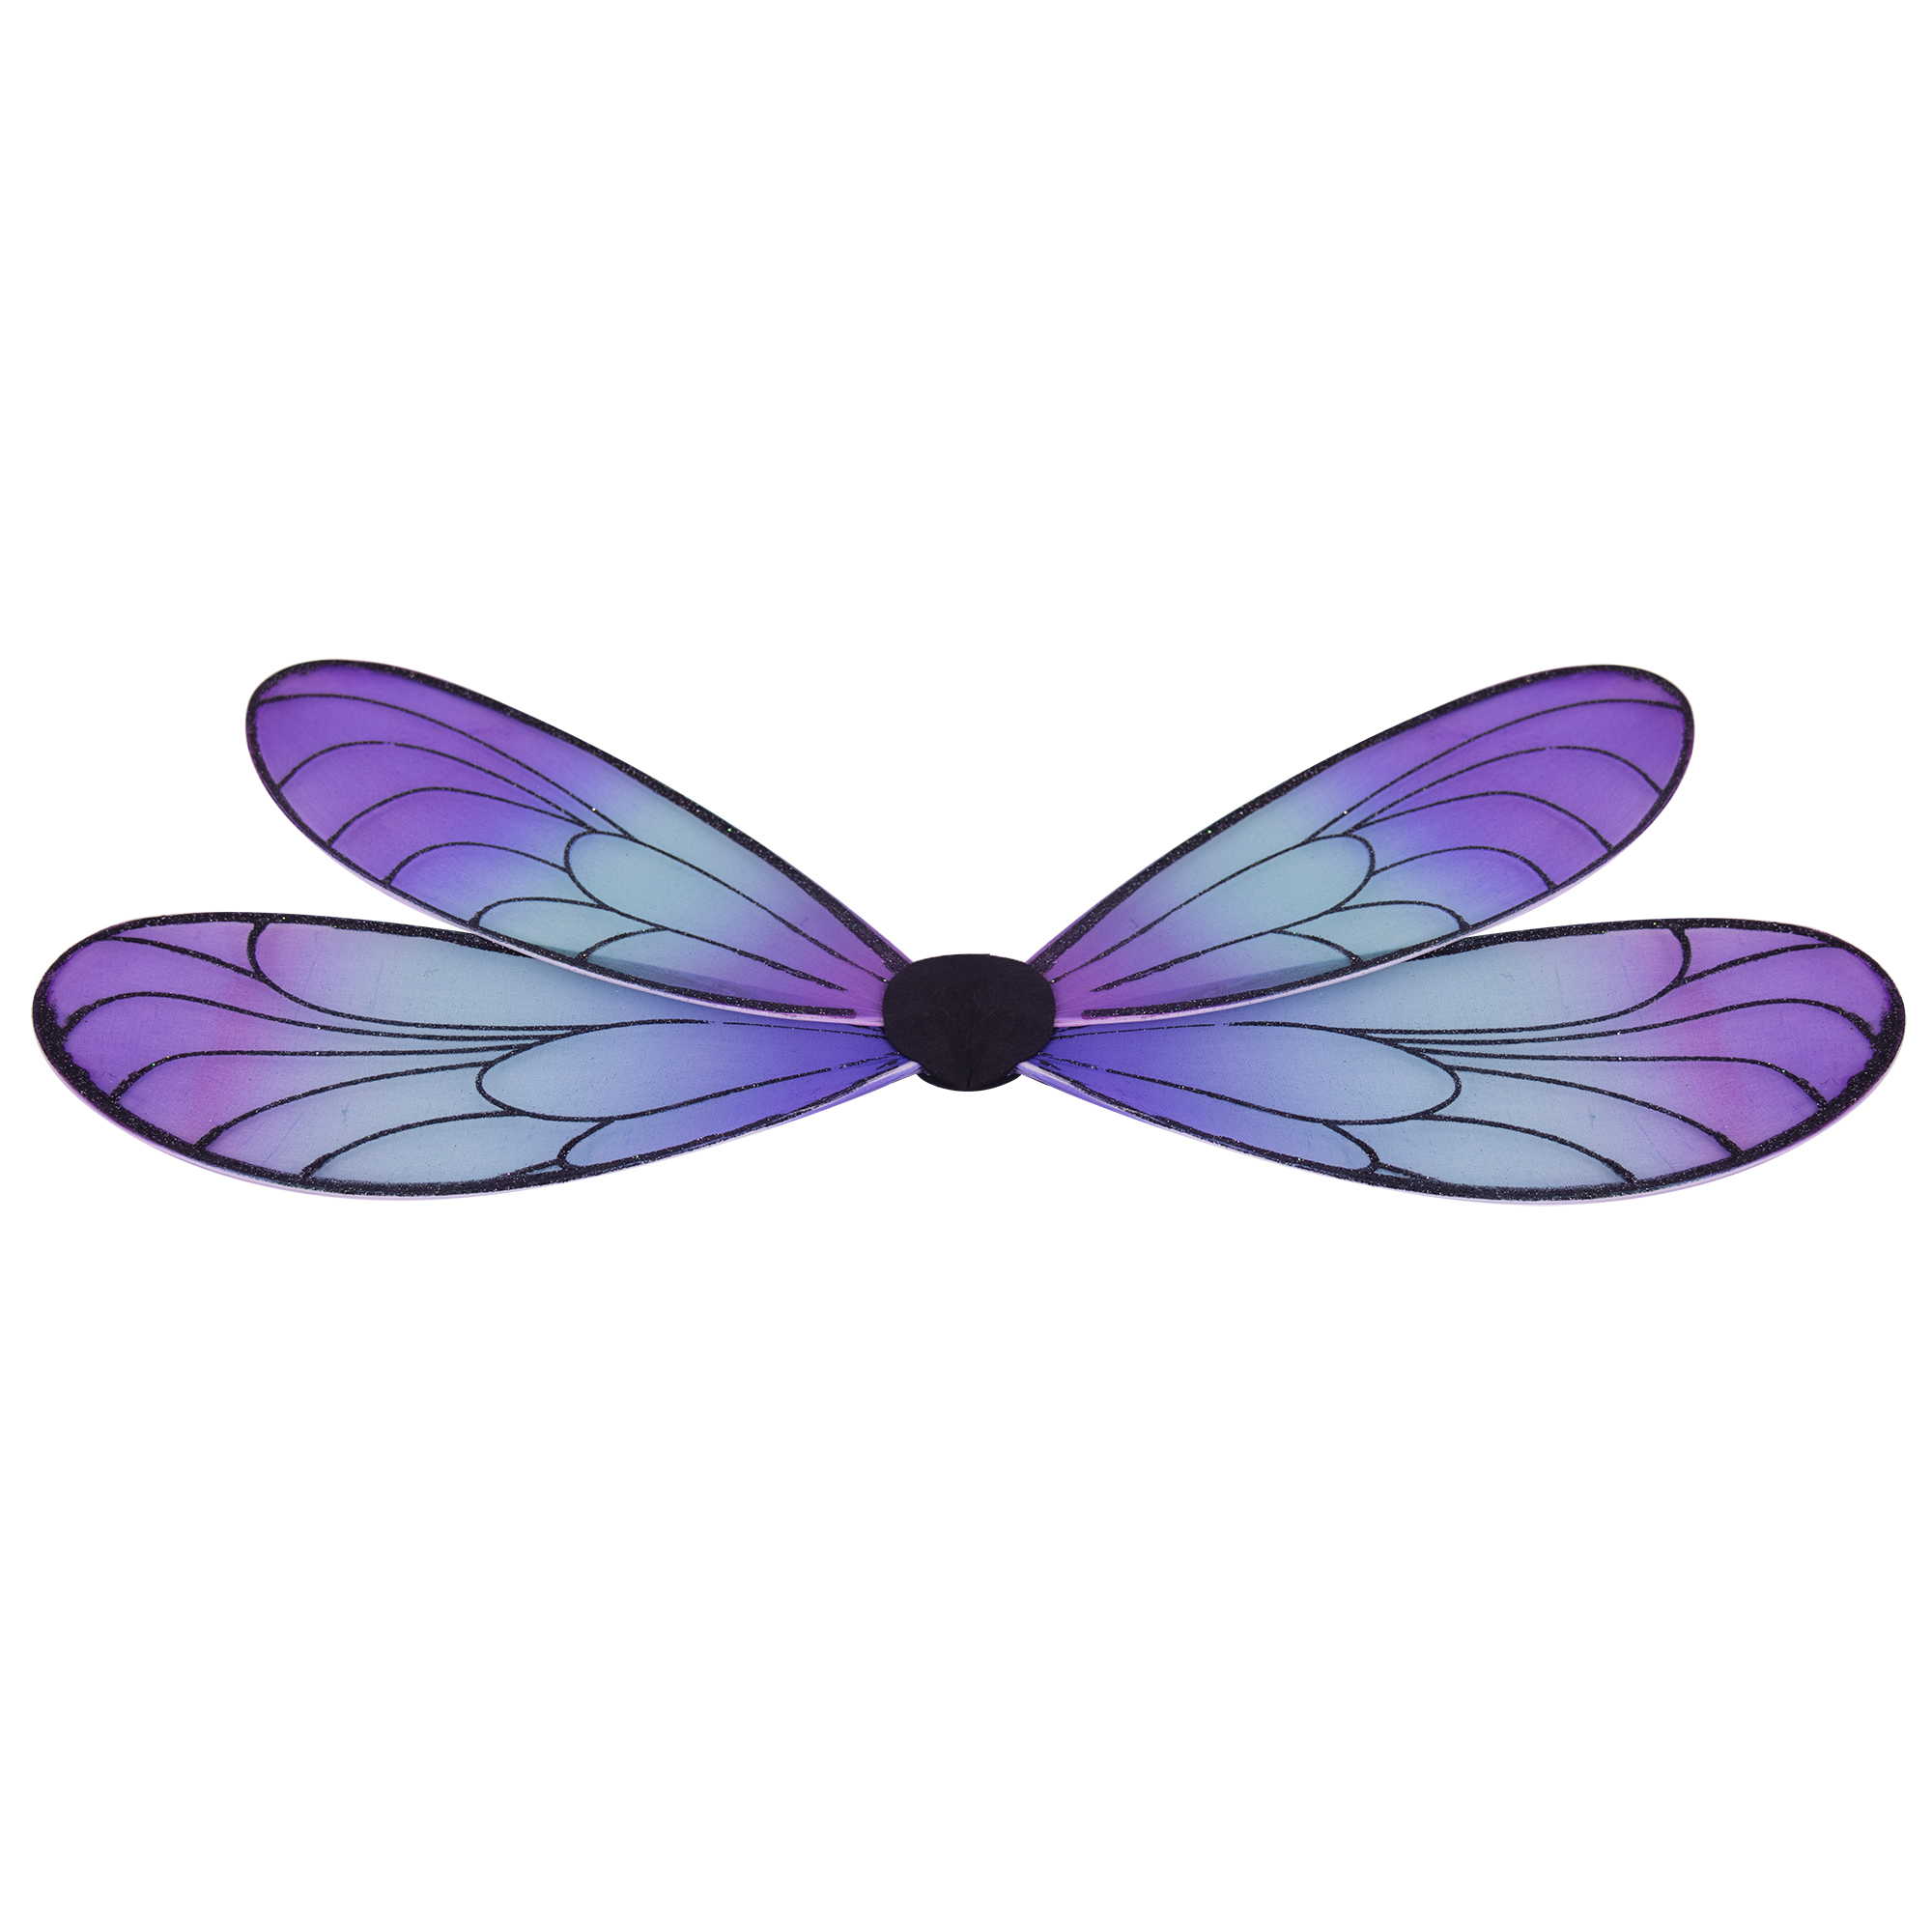 Halloween Women's Dragonfly Wings Costume Accessory, by Way to Celebrate, One Size - image 5 of 6